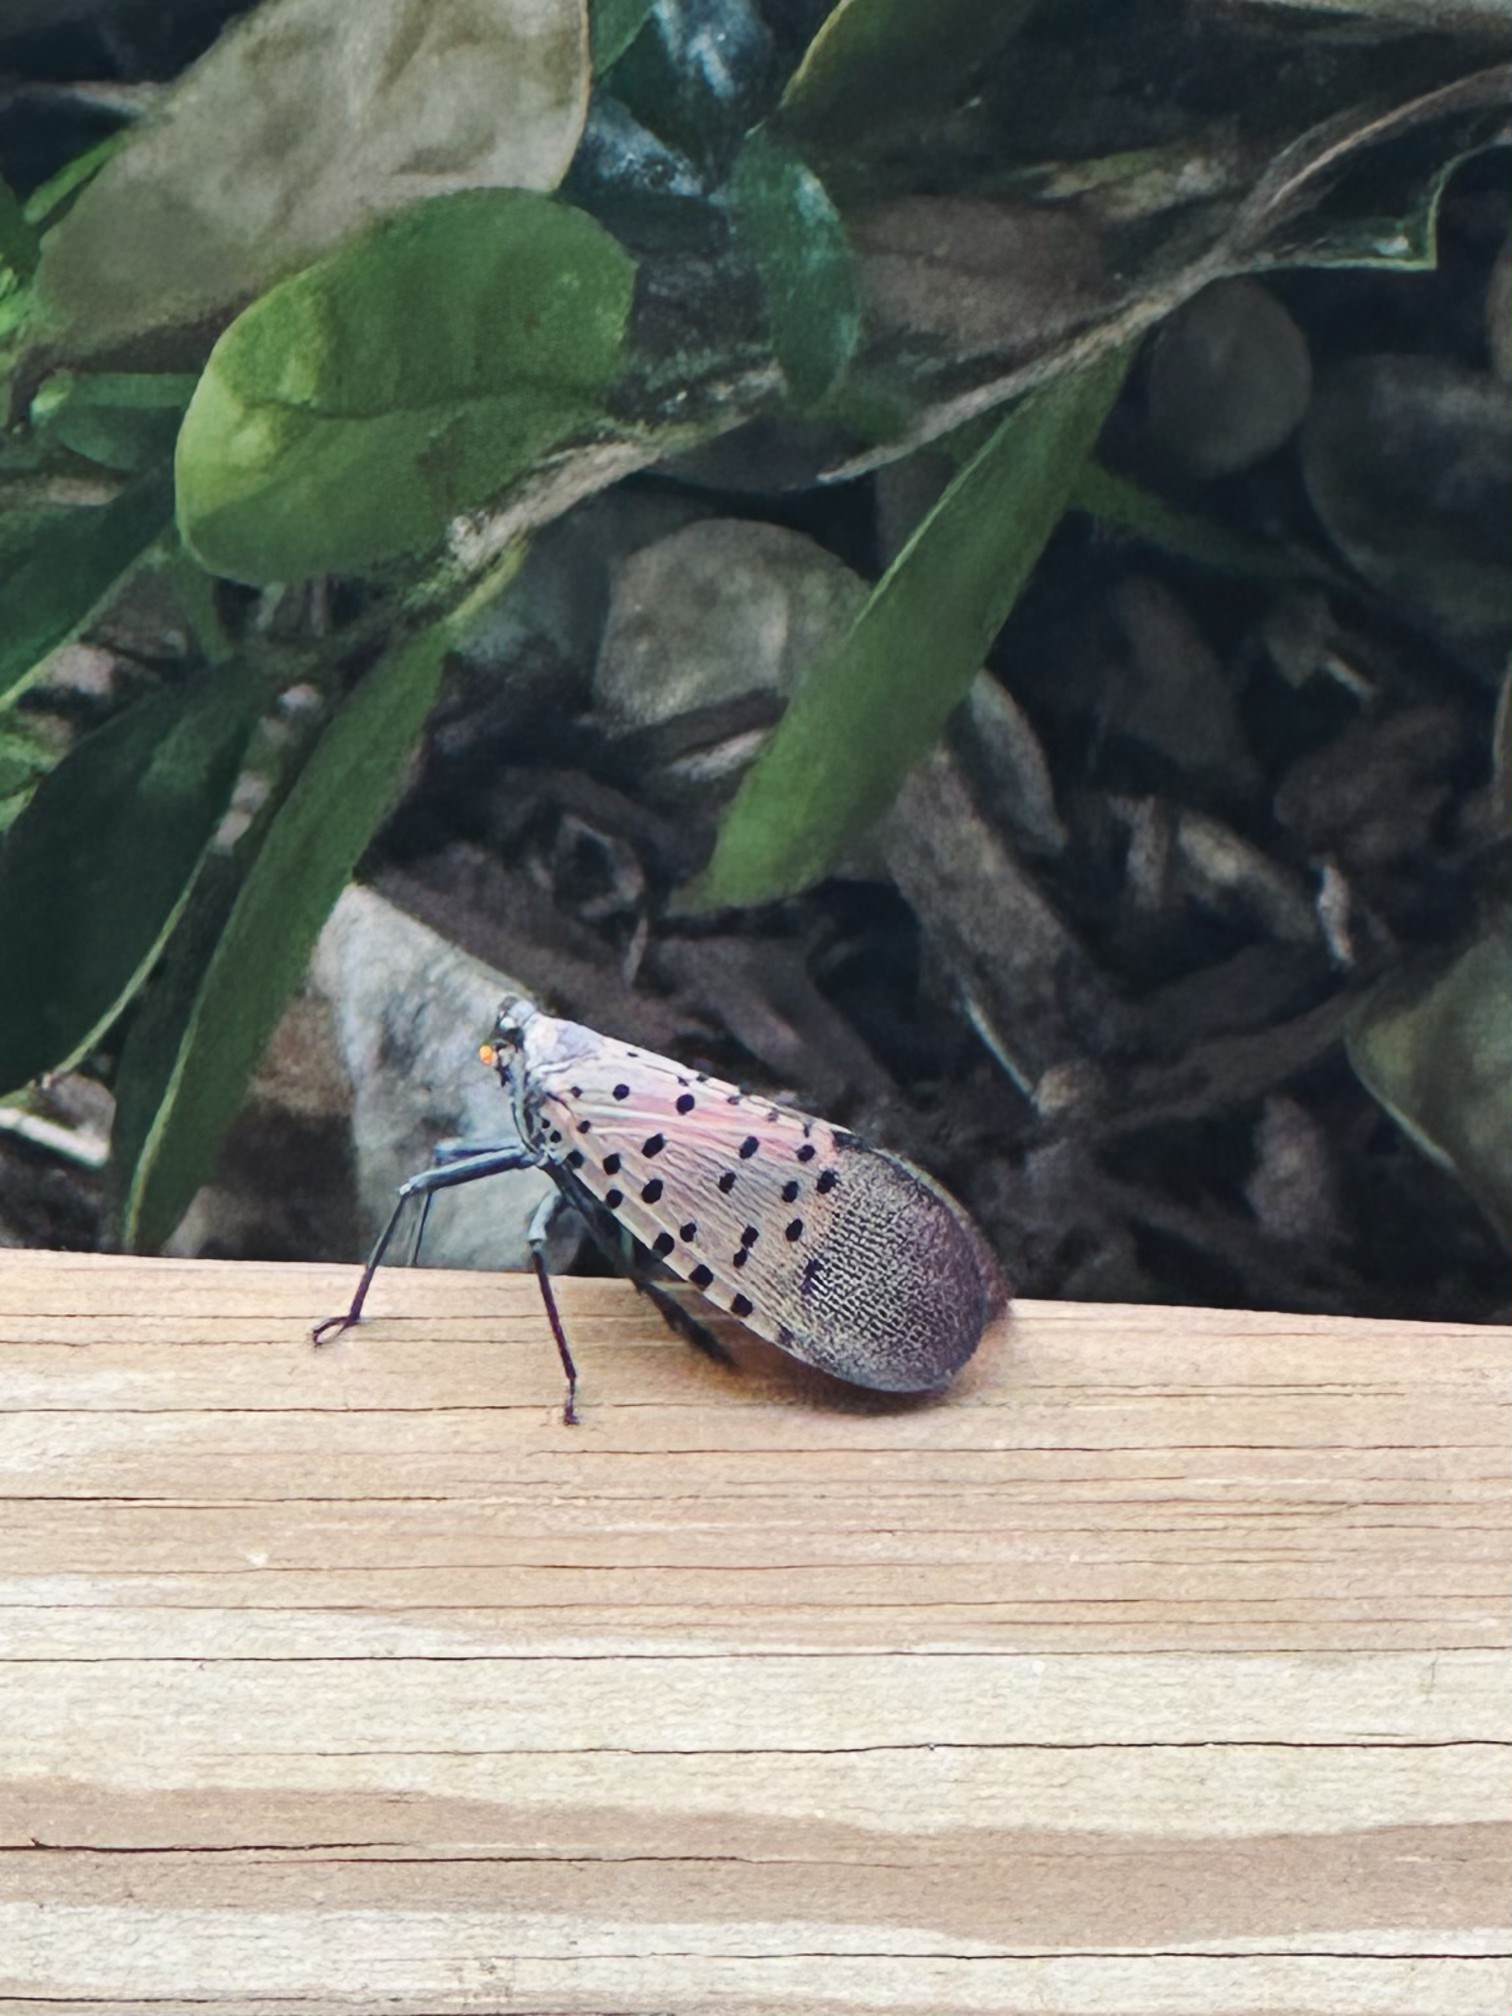 Insects Waking Up Now In MD: Spotted Lanternflies, Stink Bugs, Bees